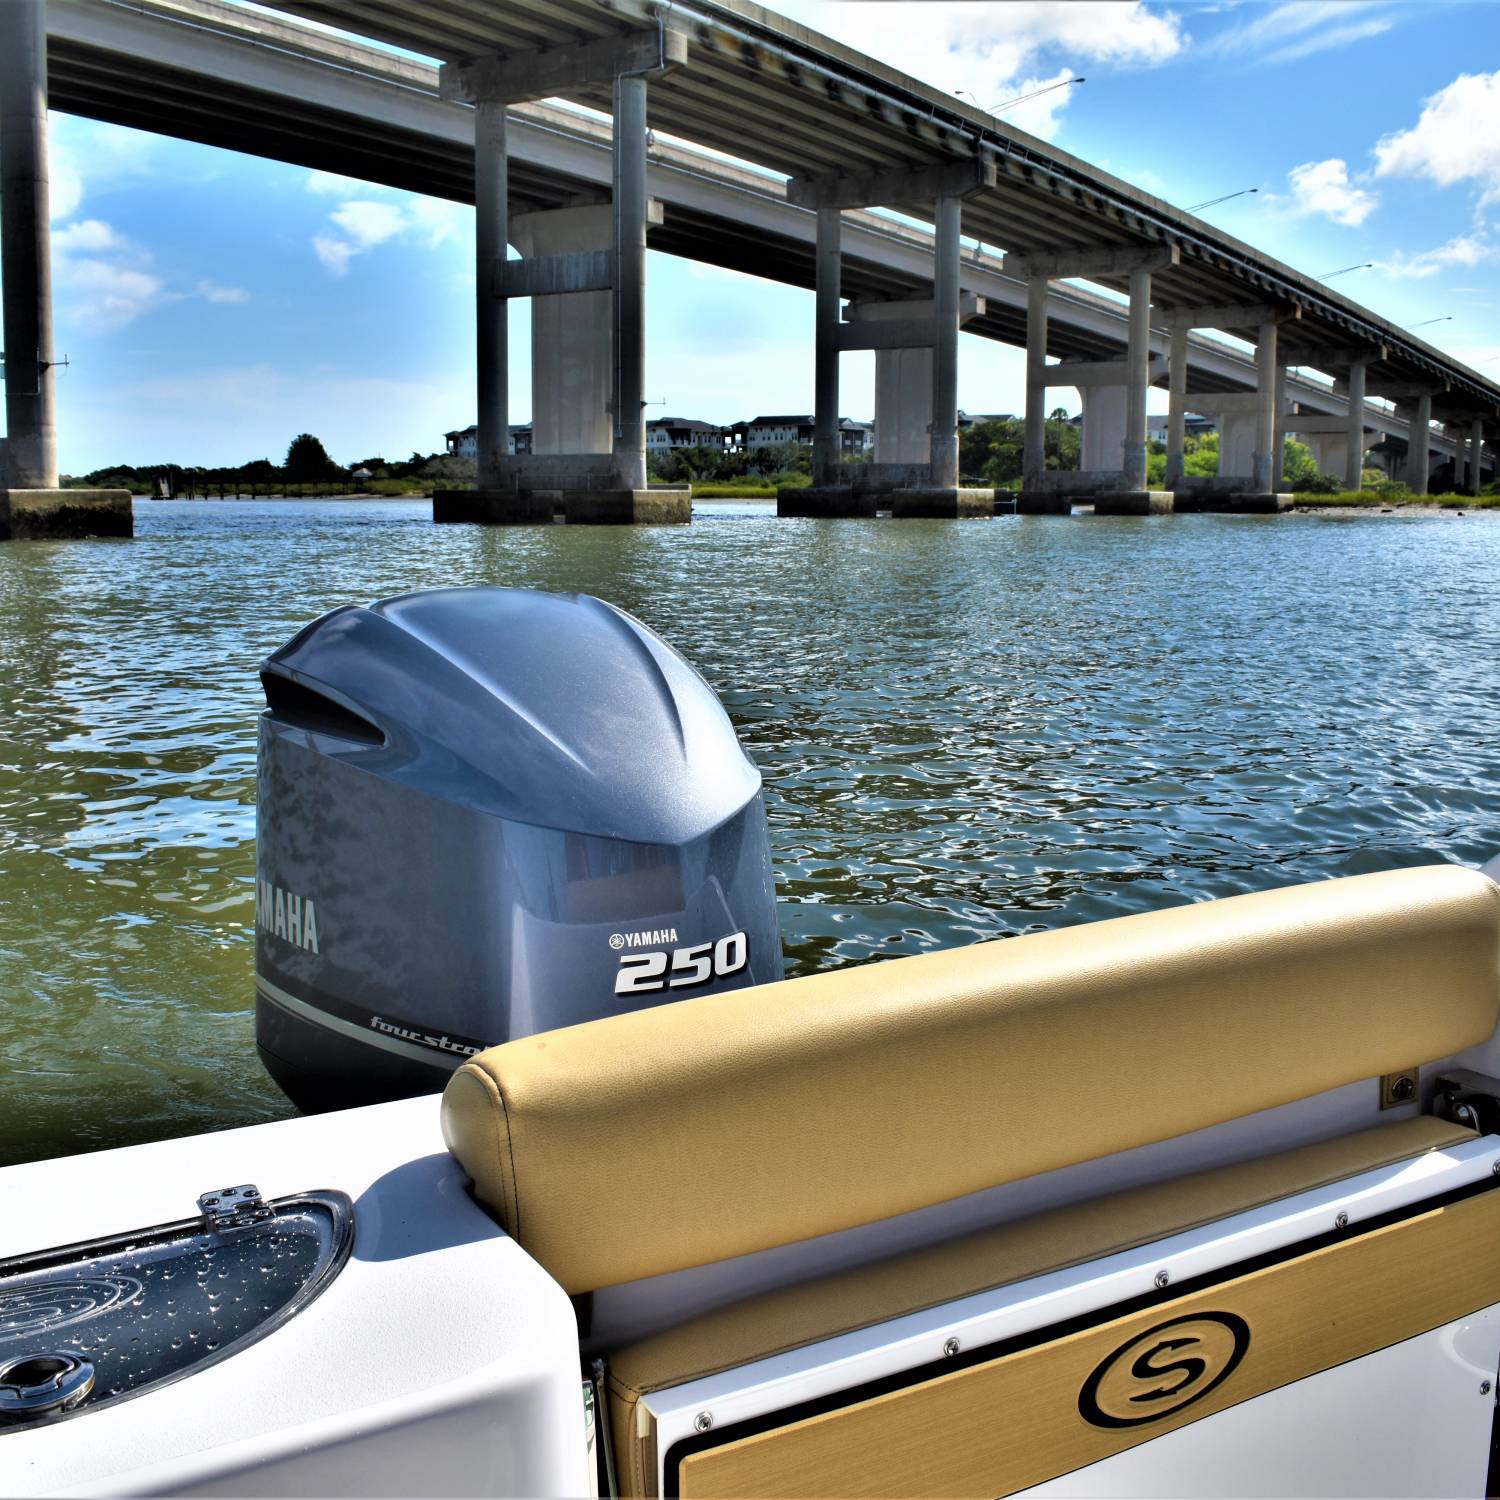 Title: Pretty boat, pretty views💝 - On board their Sportsman Open 232 Center Console - Location: Intracoastal Saint Augustine, FL. Participating in the Photo Contest #SportsmanSeptember